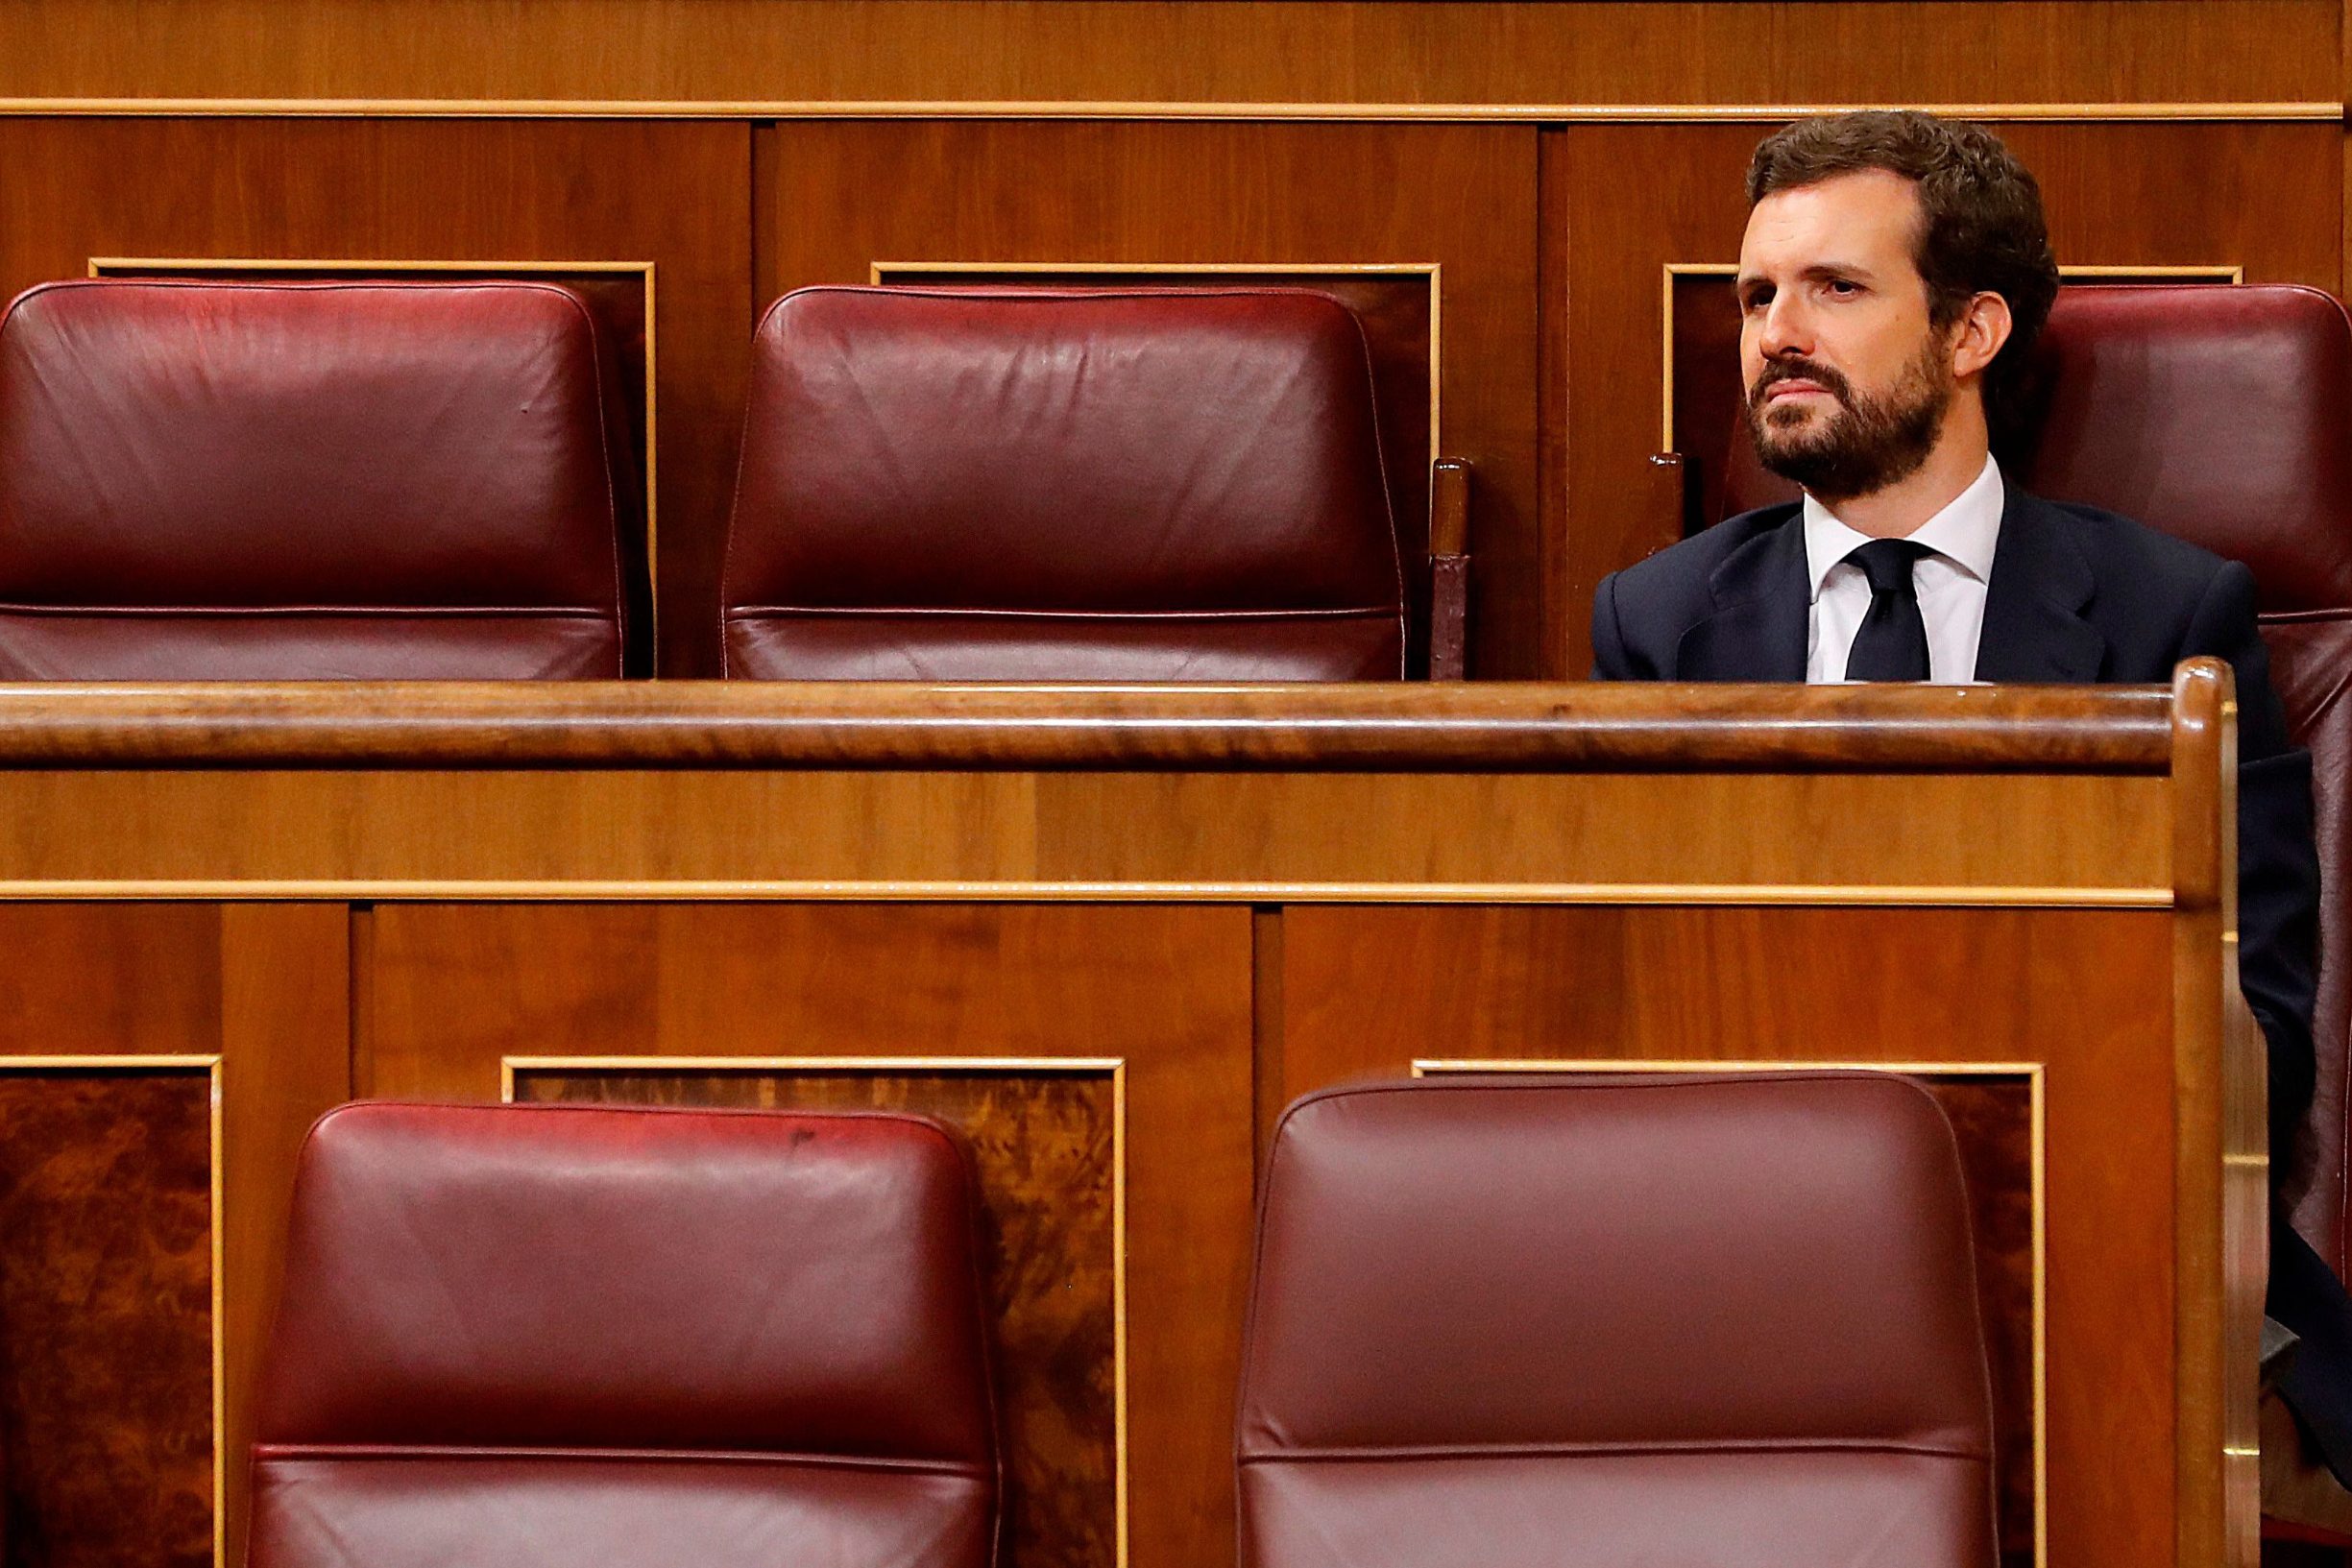 Spanish People's Party (PP) leader Pablo Casado attends the prime minister's question time session held for the first time since the state of alarm was declared at the Lower Chamber of the Spanish parliament in Madrid on April 15, 2020. - Spain's daily death toll from the coronavirus fell to 523, after posting a one-day rise, bringing the total number of fatalities to 18,579, the health ministry said. (Photo by Andres BALLESTEROS / POOL / AFP)